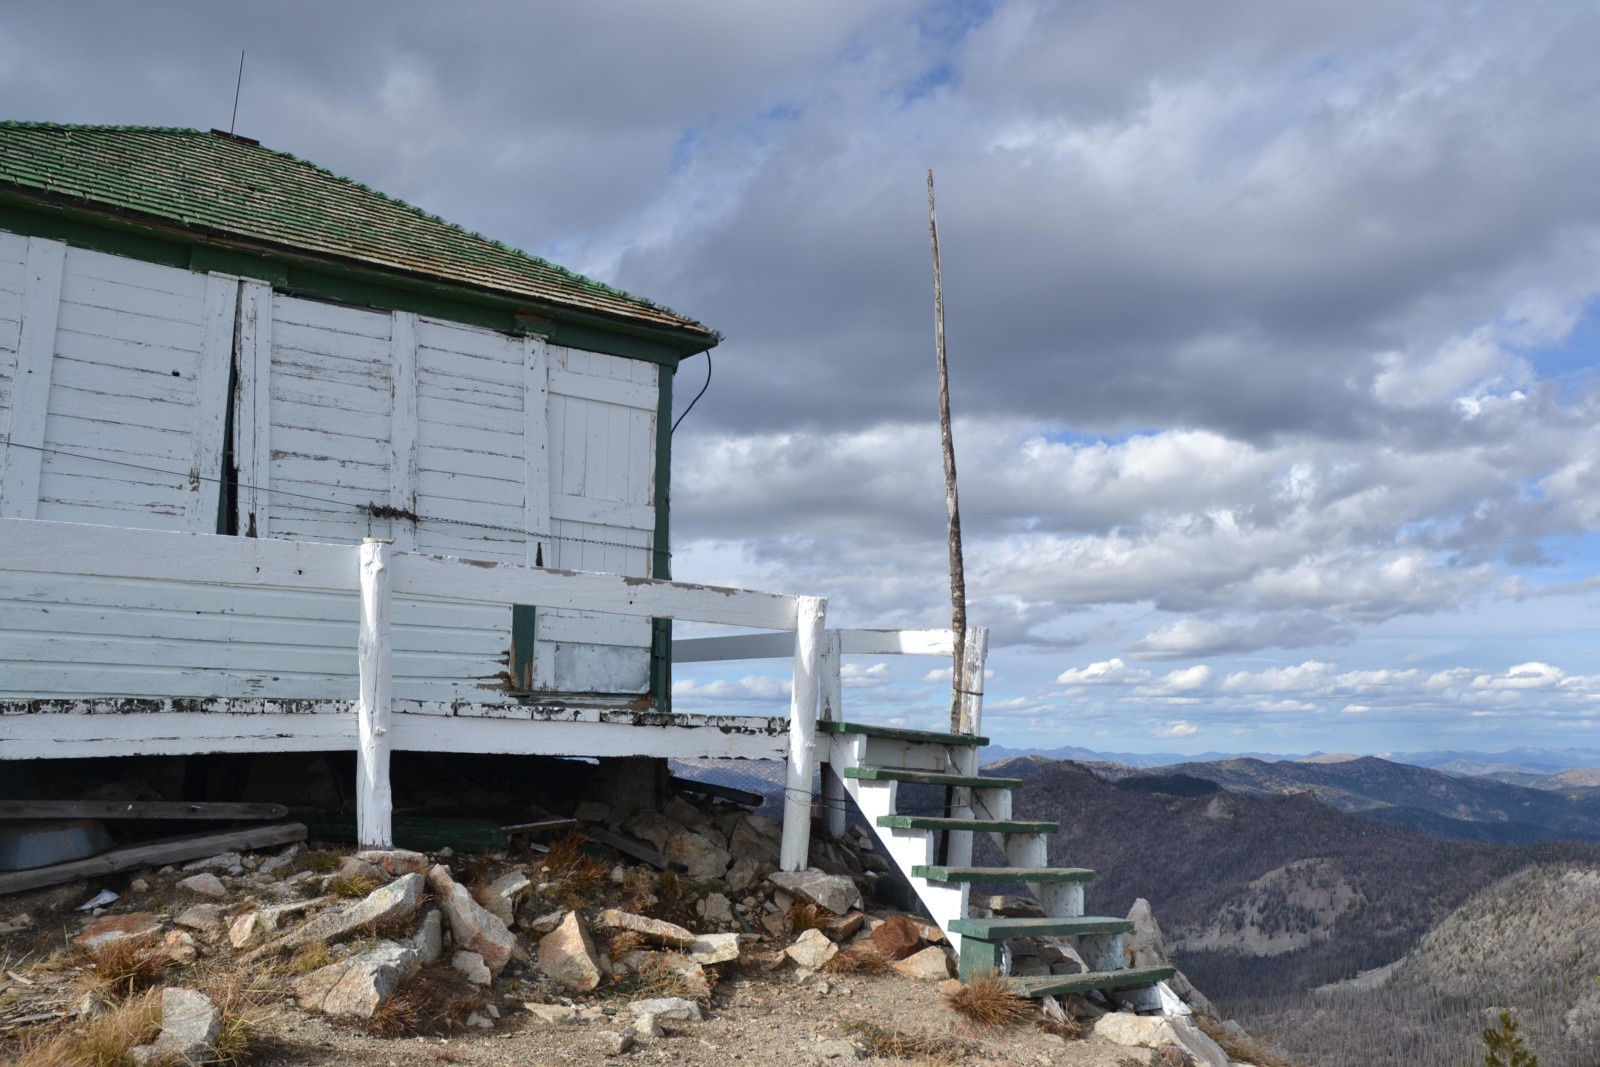 A shack on the side of a mountain | Stanley Chamber